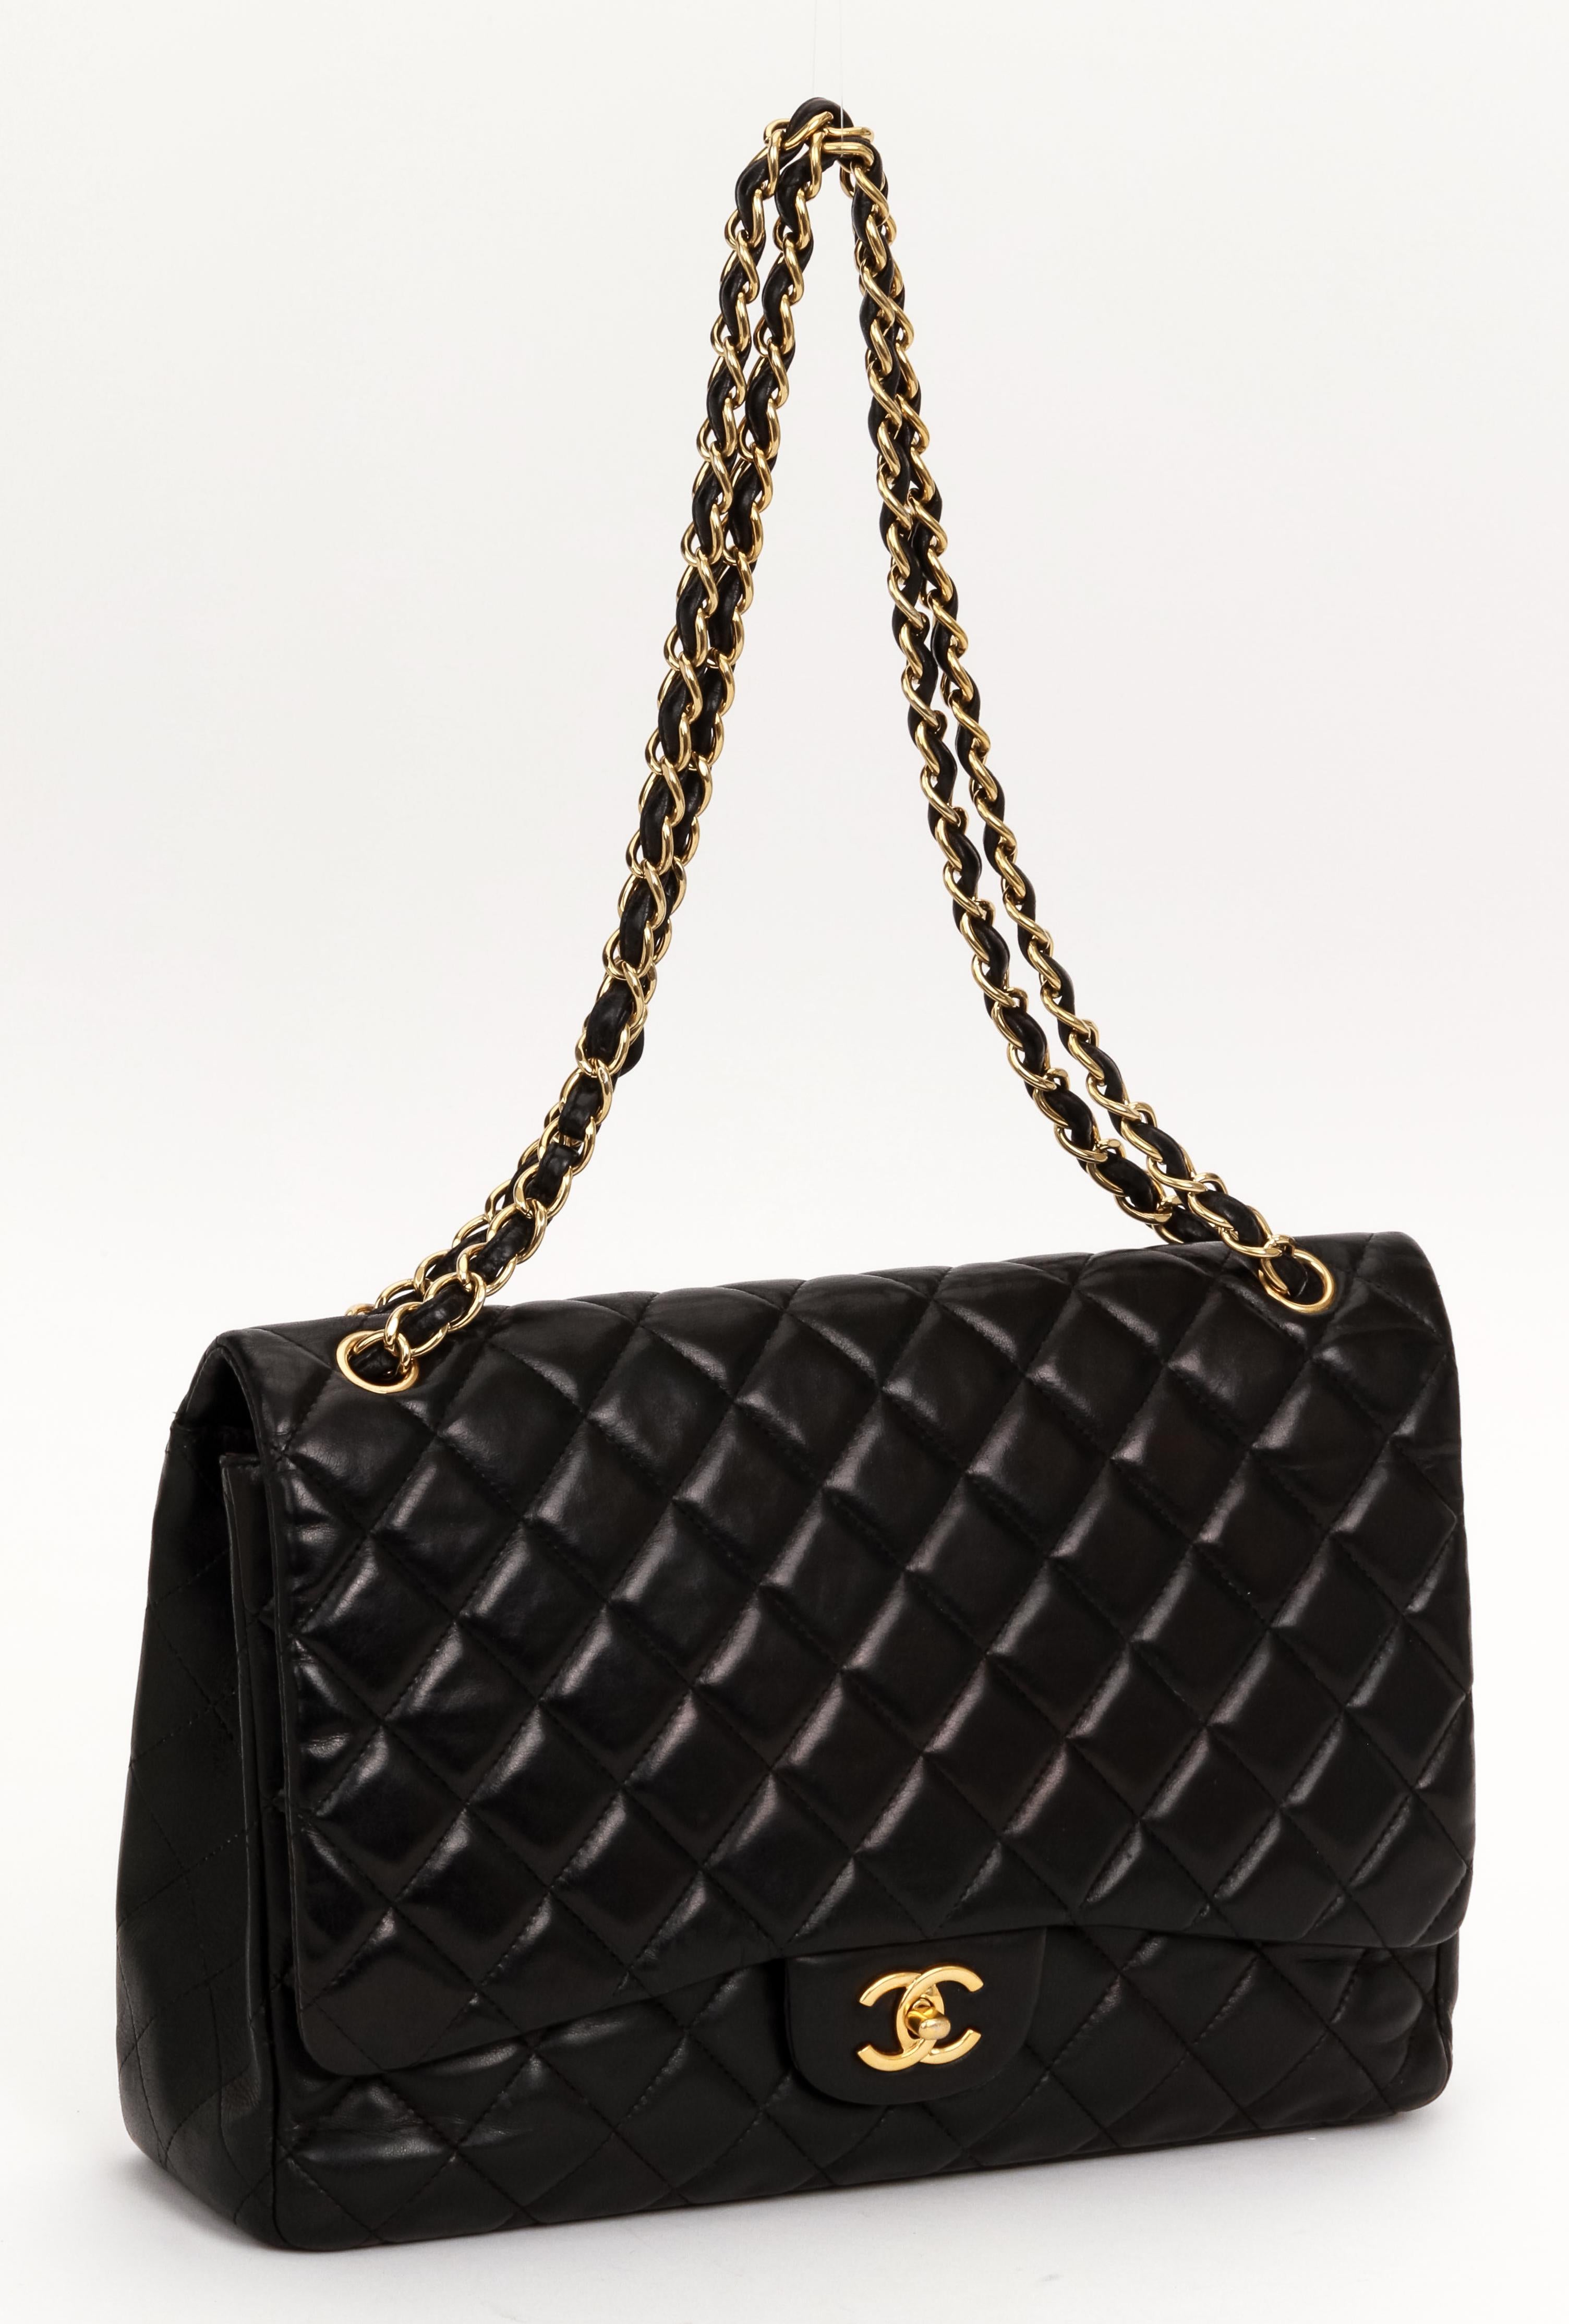 Chanel black quilted lambskin single maxi flap with gold tone hardware. Collection 2010. Shoulder drop 11